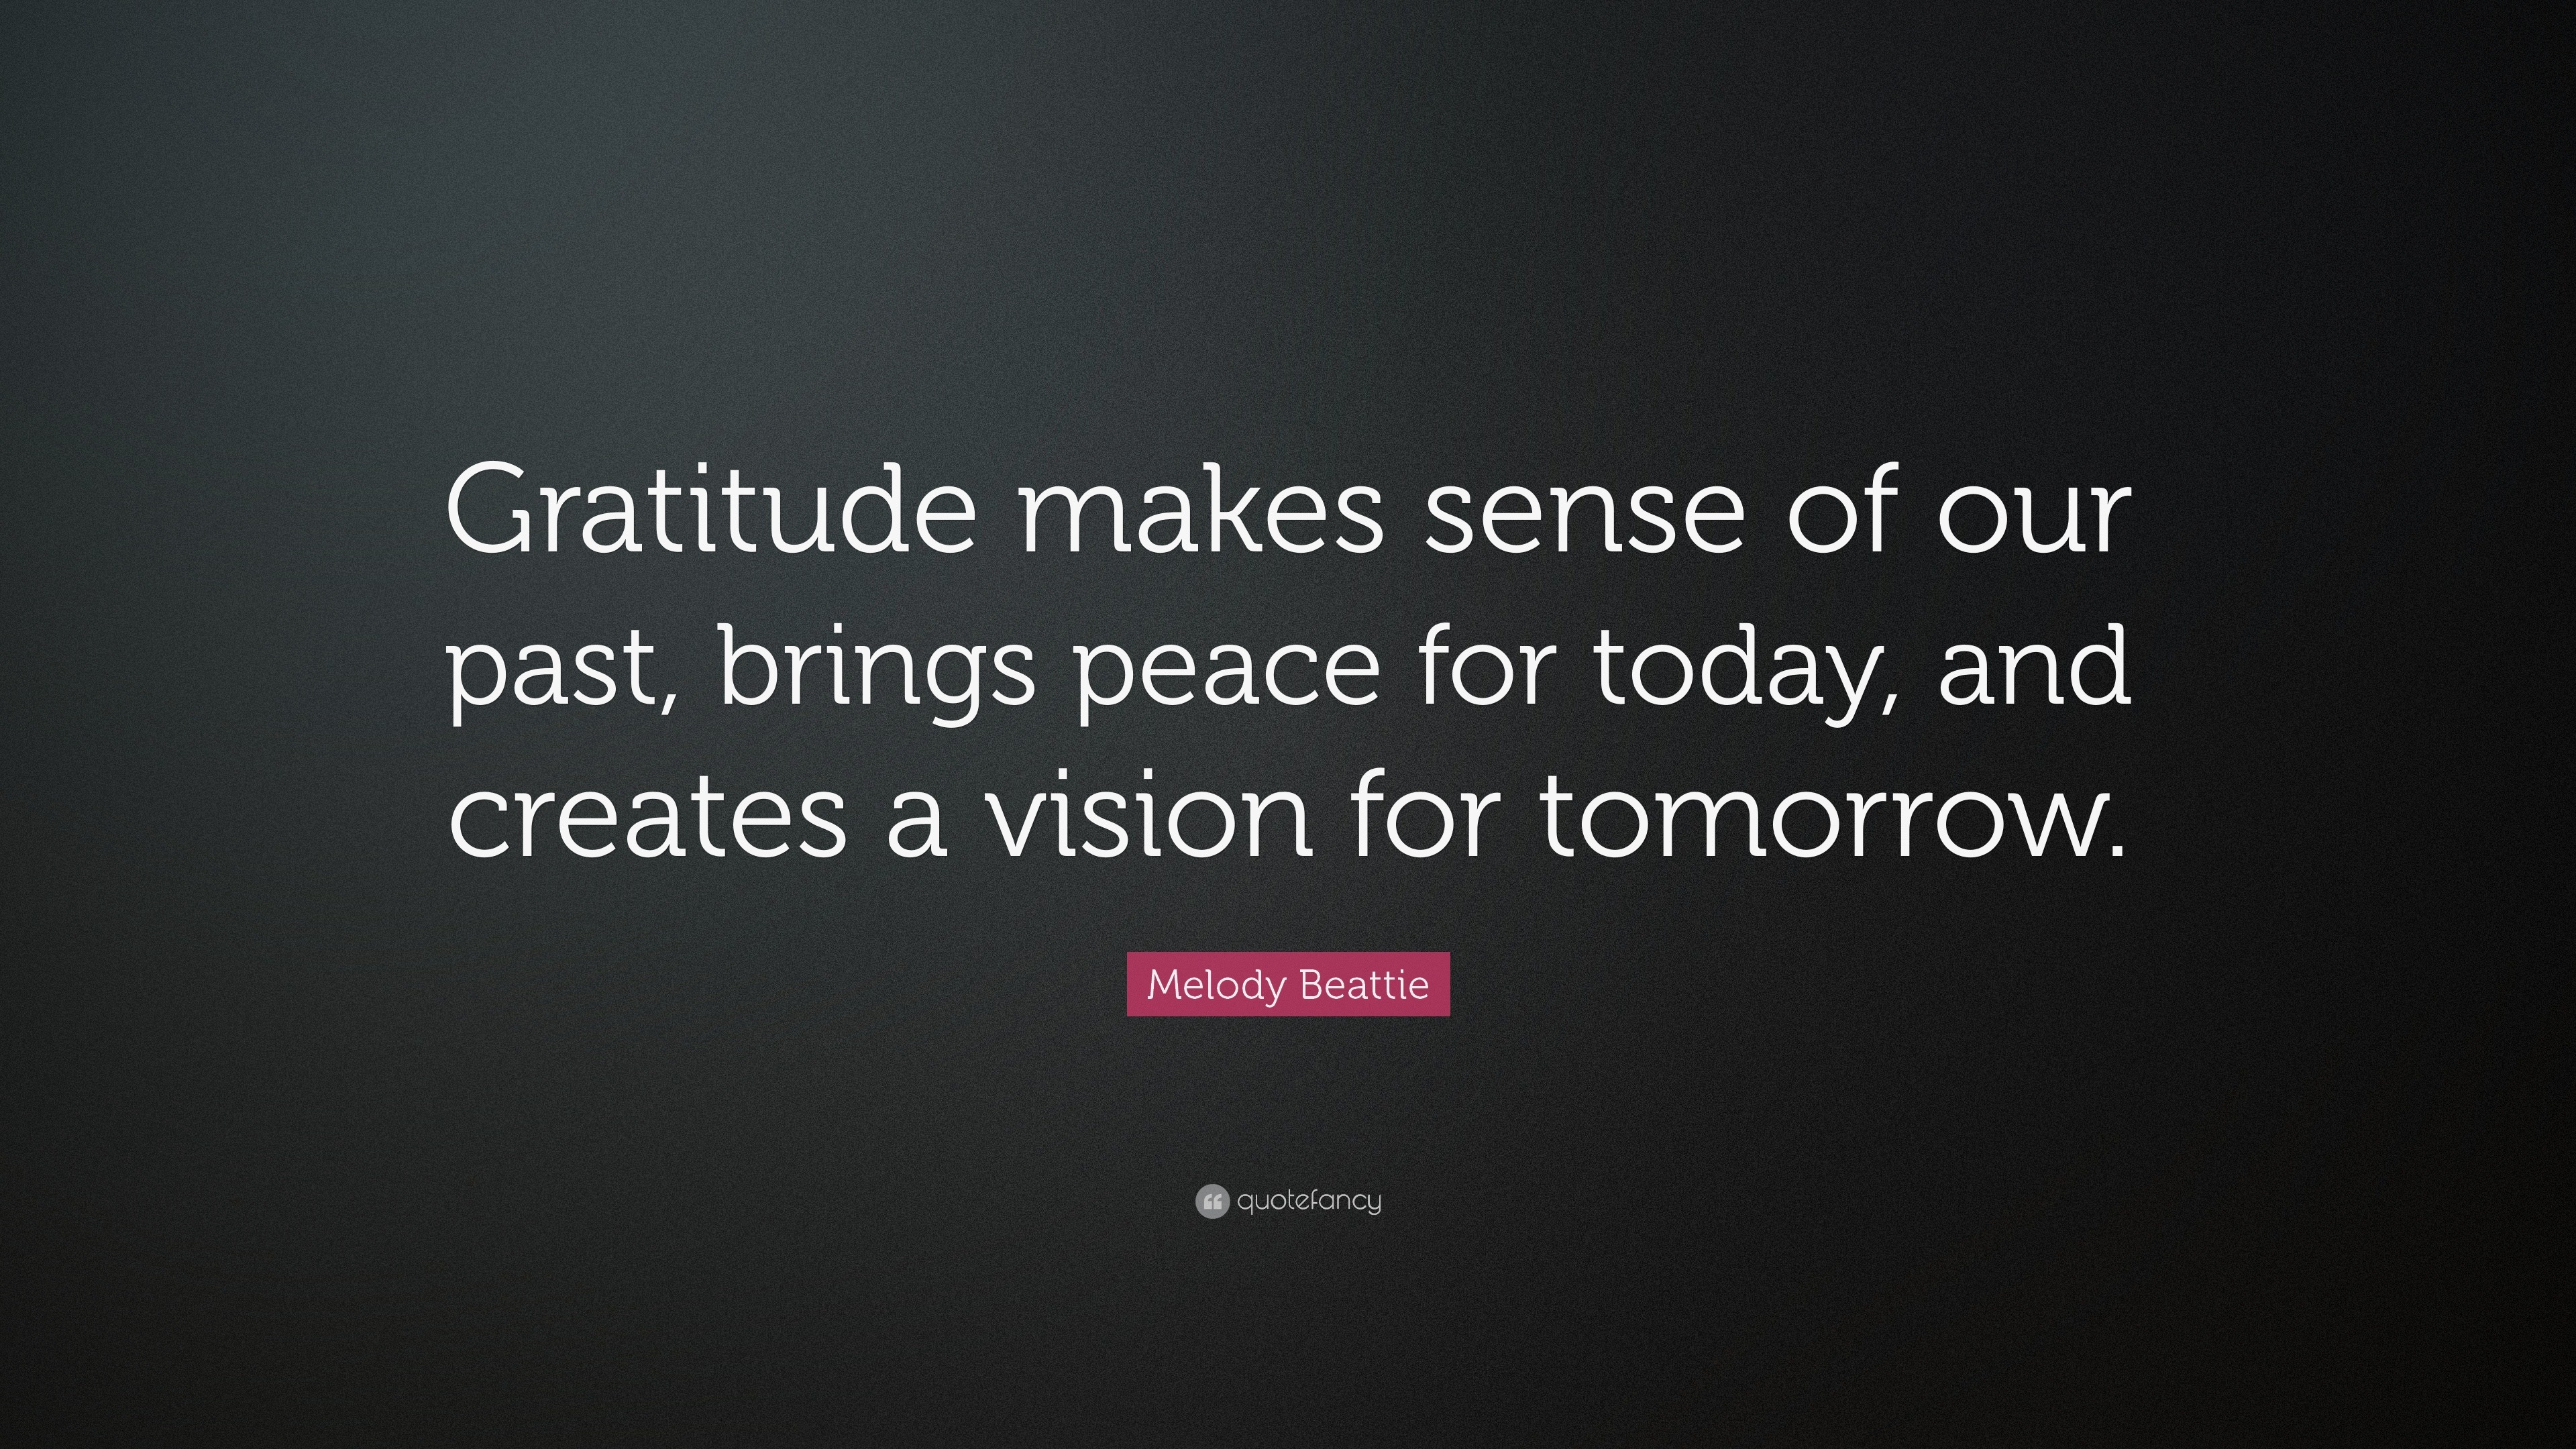 Melody Beattie Quote: “Gratitude makes sense of our past, brings peace ...